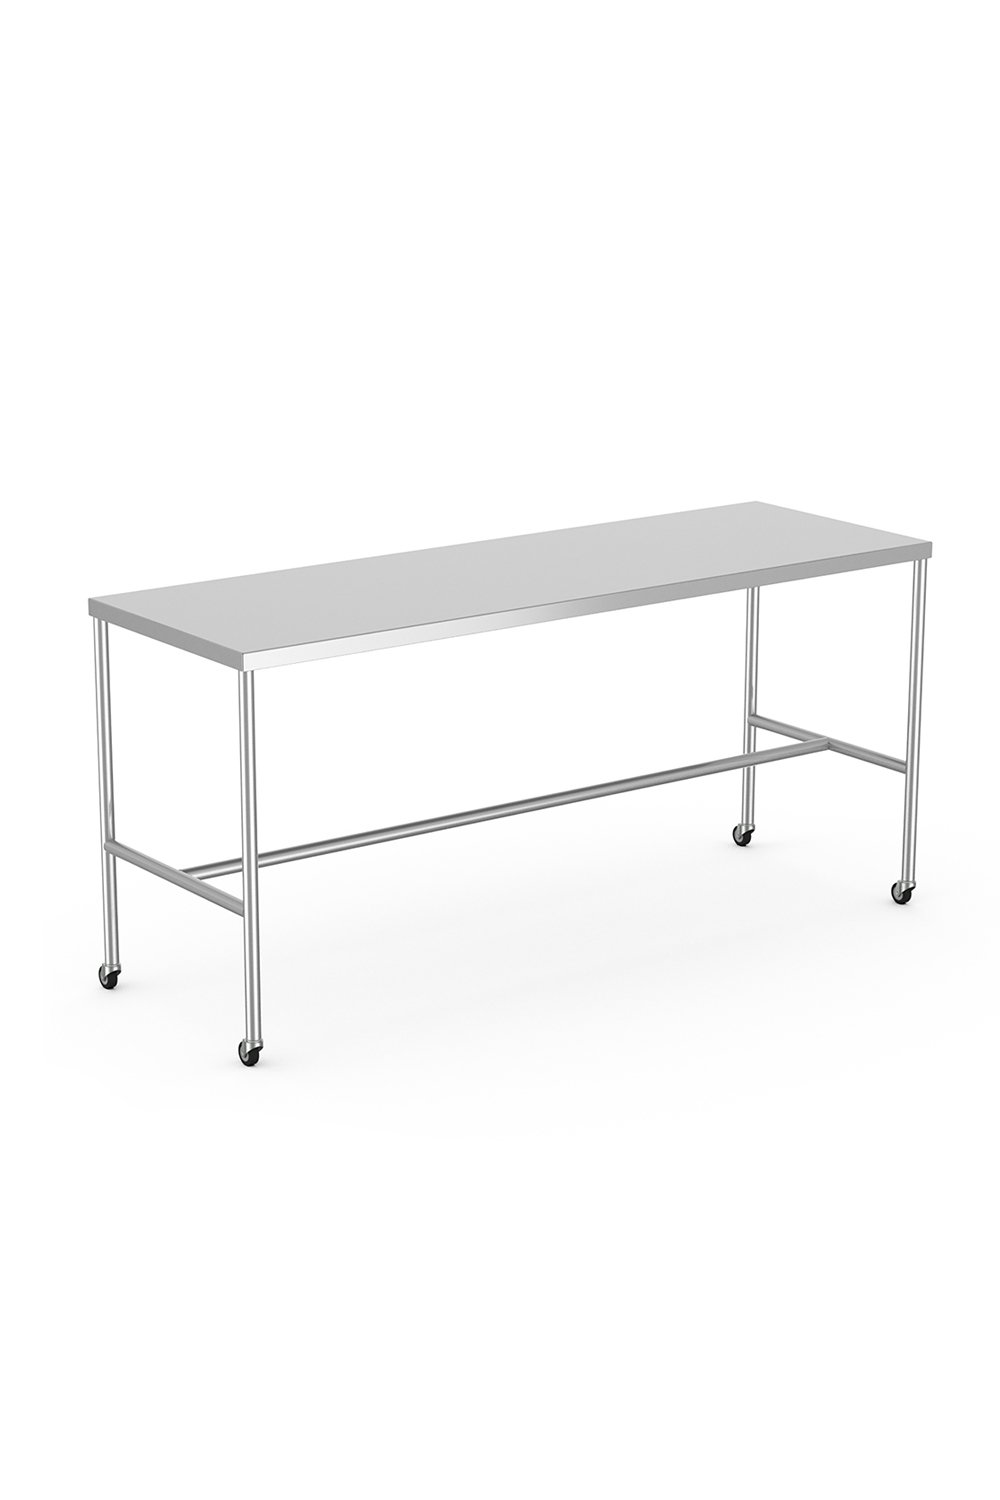 Stainless Steel Table Stainless Solutions Macmedical 24"D x 72"W x 34"H H-Brace 